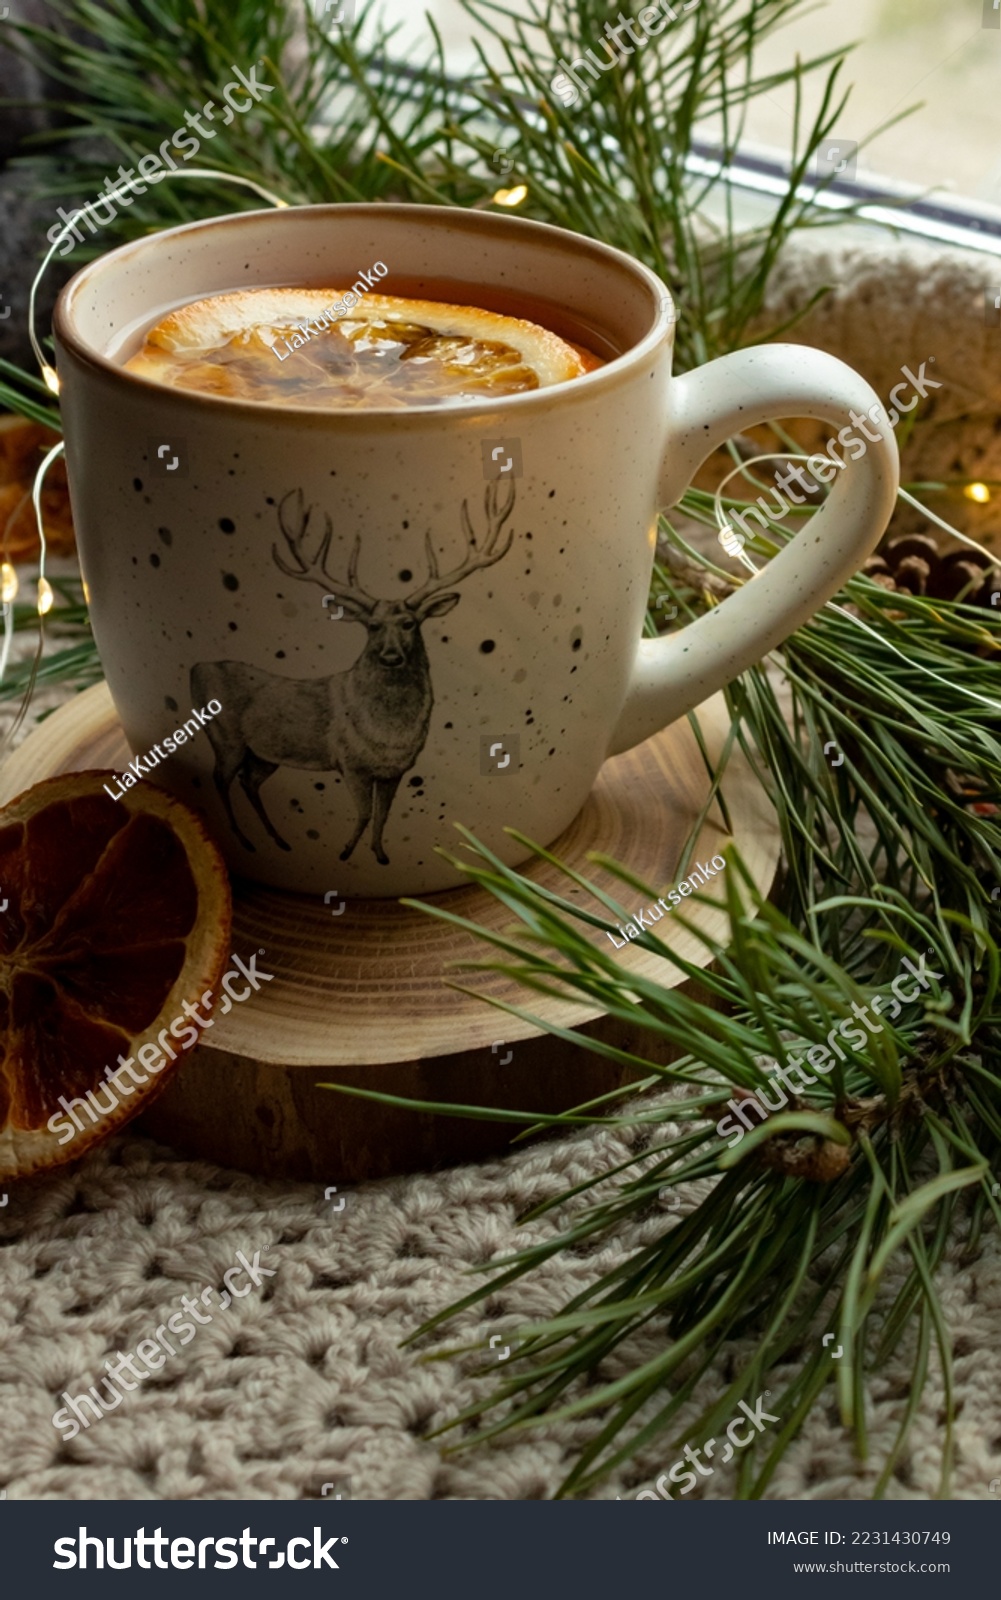 A cup of green tea, dried orange on a knitted, fabric rug, pine needles branches, New Year's atmosphere #2231430749